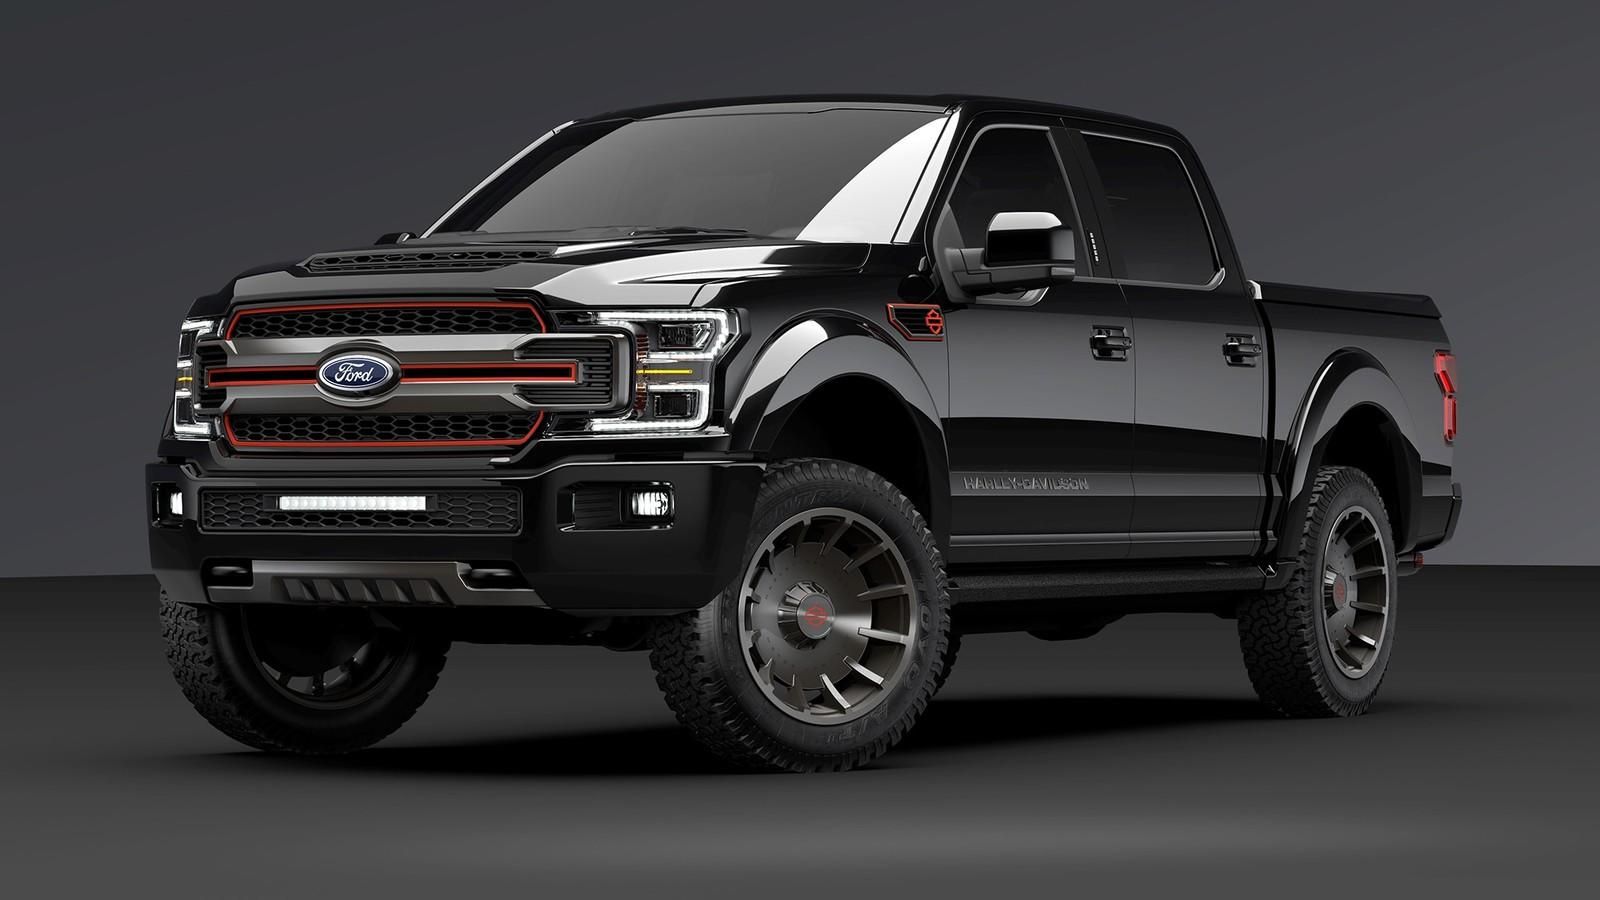 the-new-ford-f-150-h-2_1600x0w.jpg